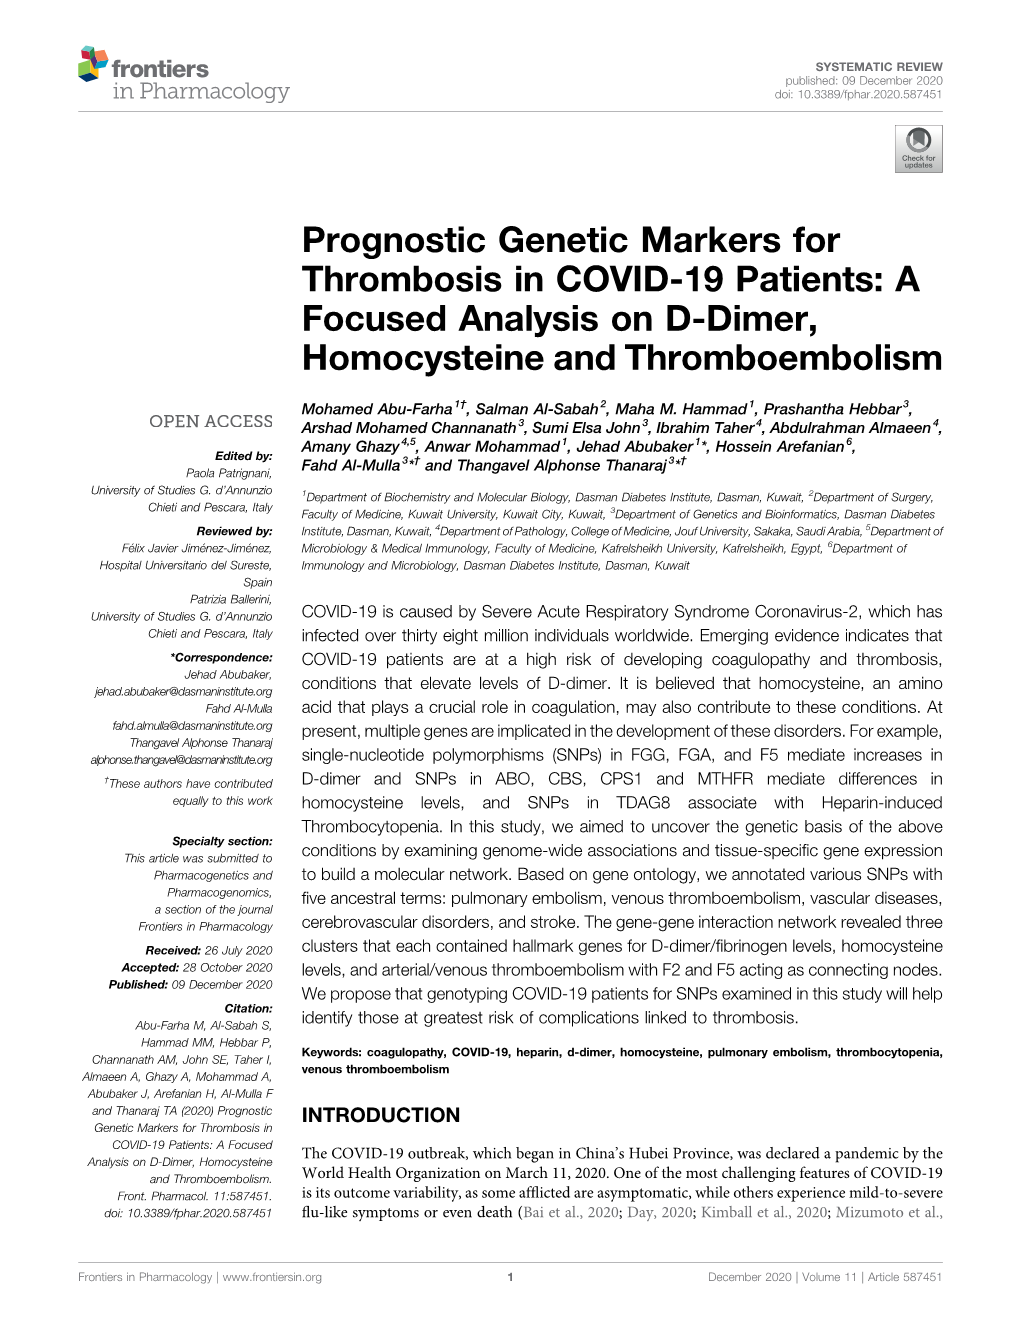 Prognostic Genetic Markers for Thrombosis in COVID-19 Patients: a Focused Analysis on D-Dimer, Homocysteine and Thromboembolism